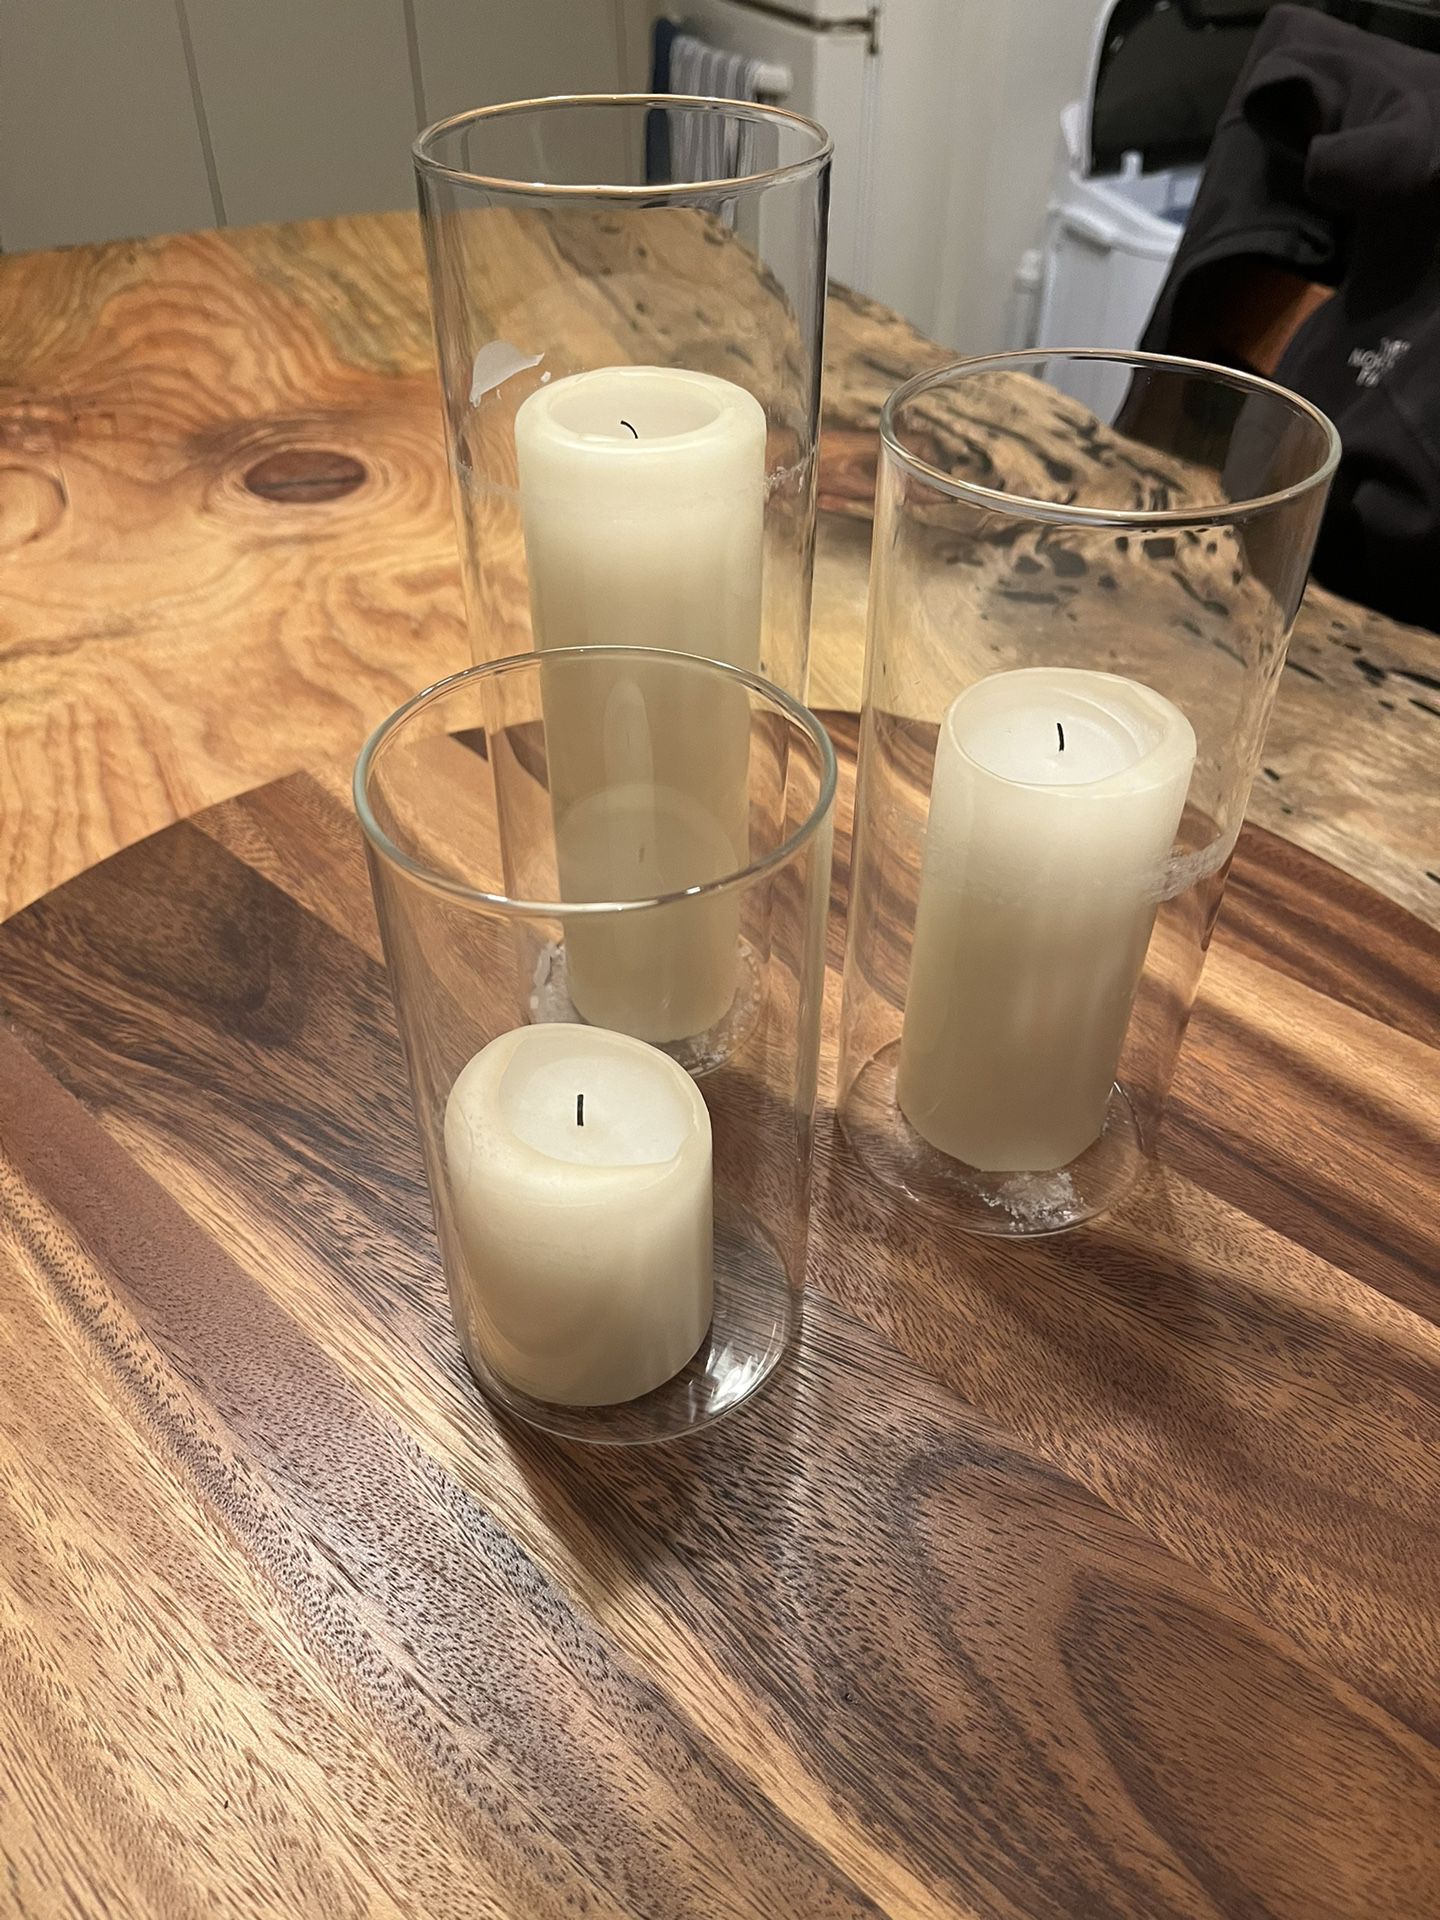 36 3-Tier Hurricane Candles And Vases